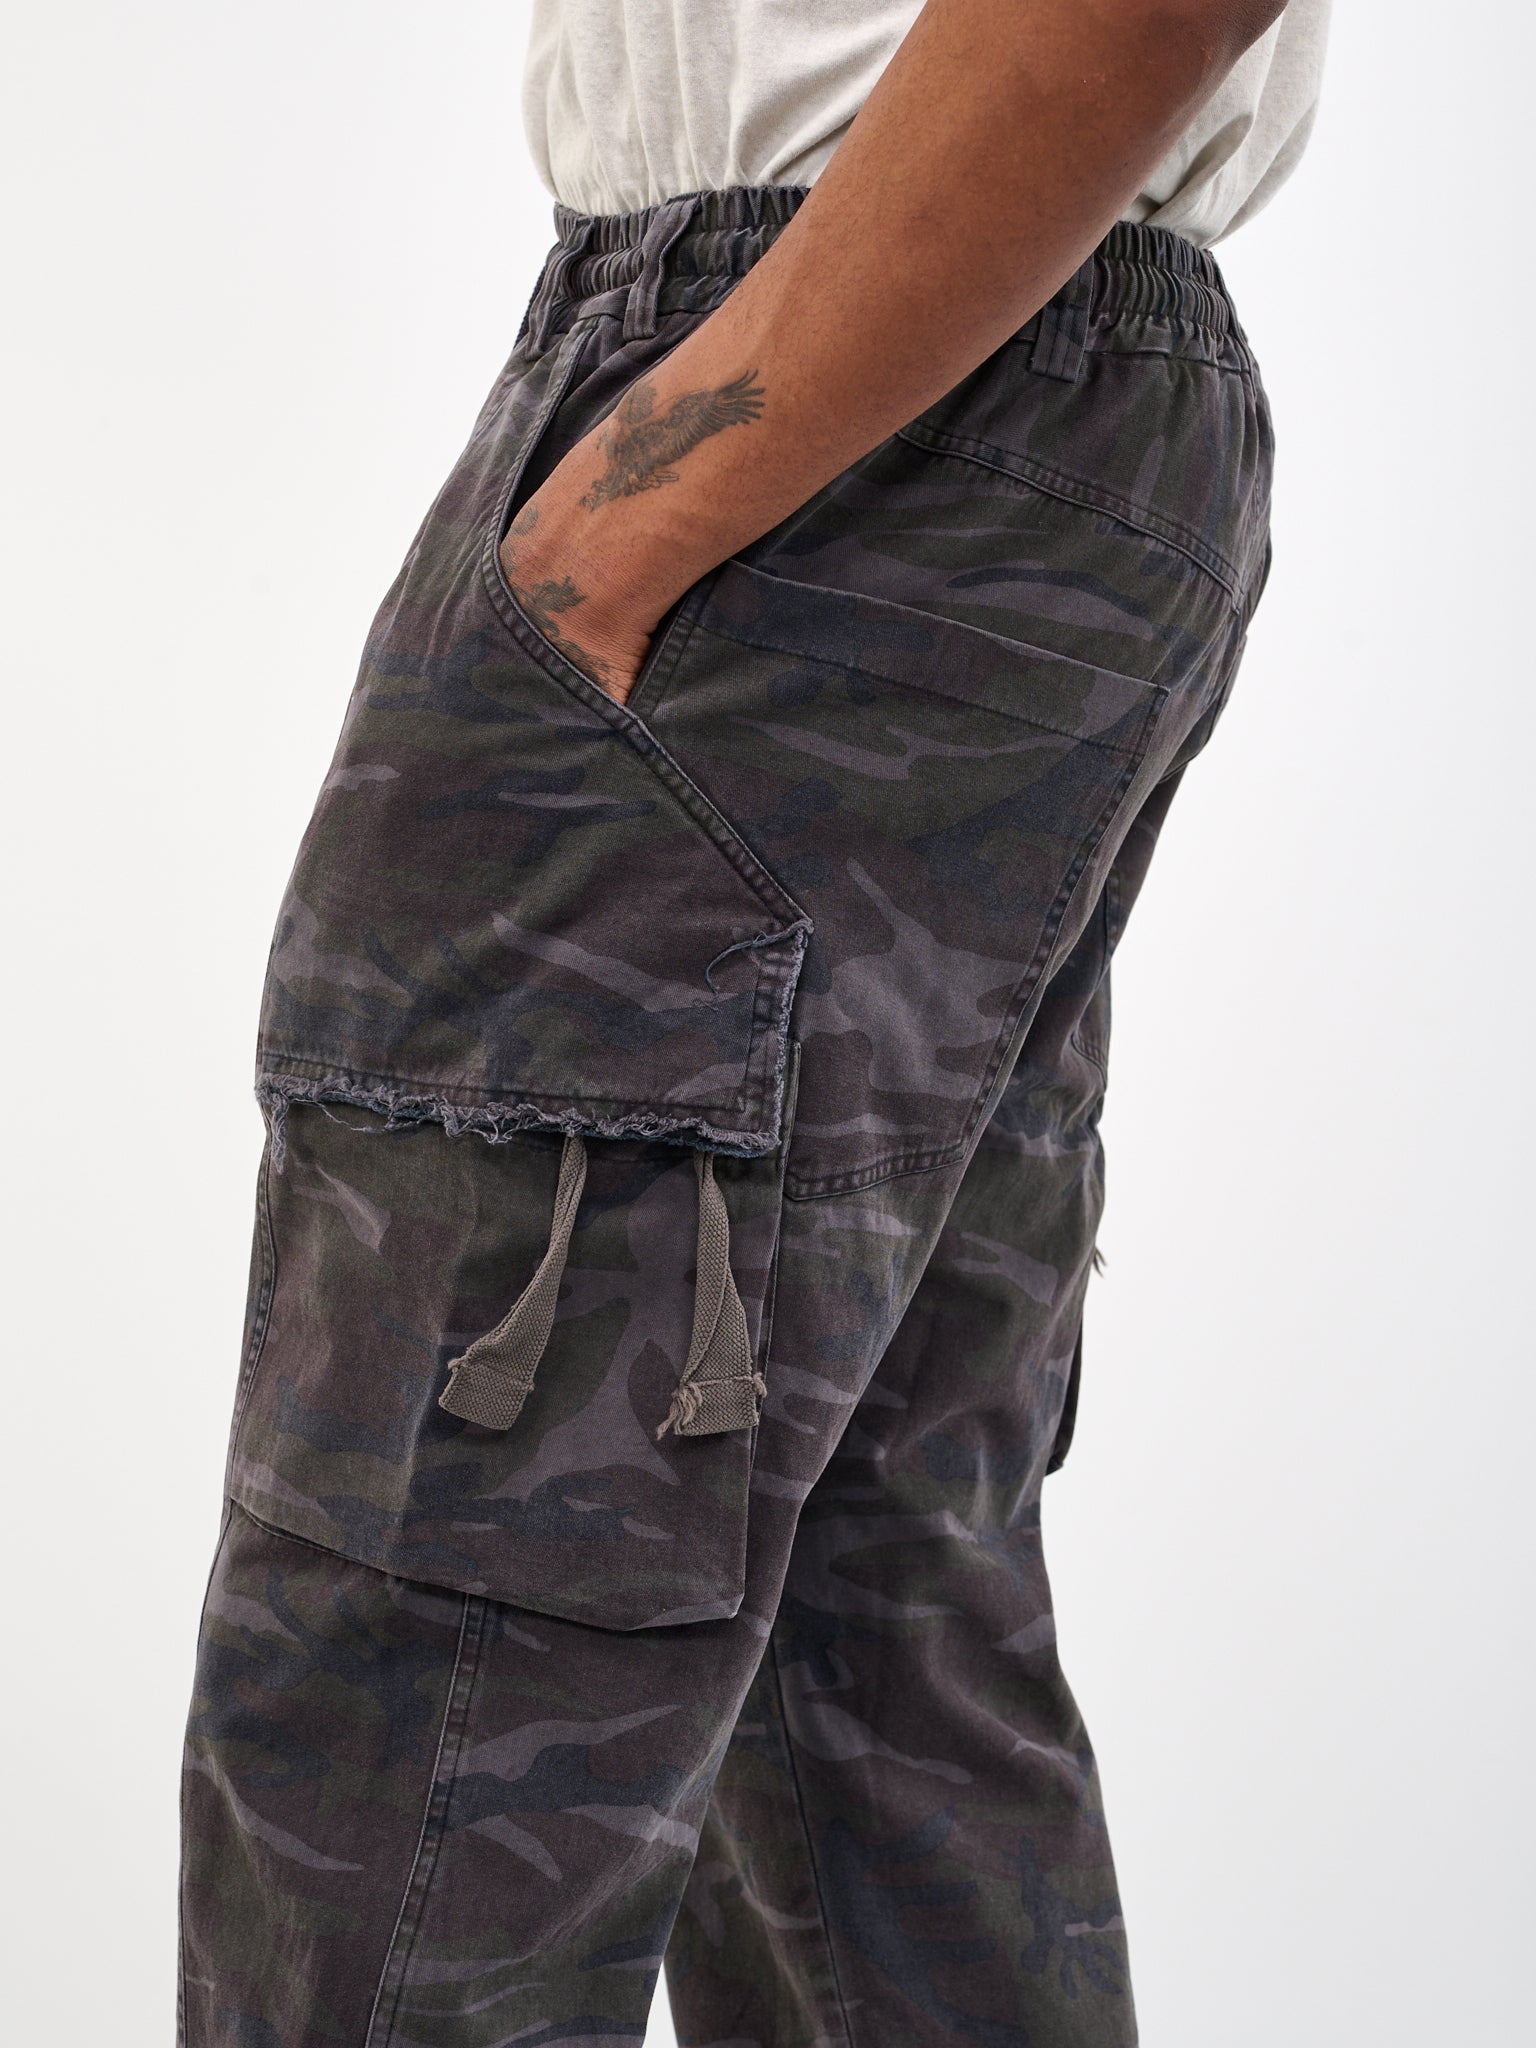 SONG FOR THE MUTE Cargo Trousers | H. Lorenzo - detail 1